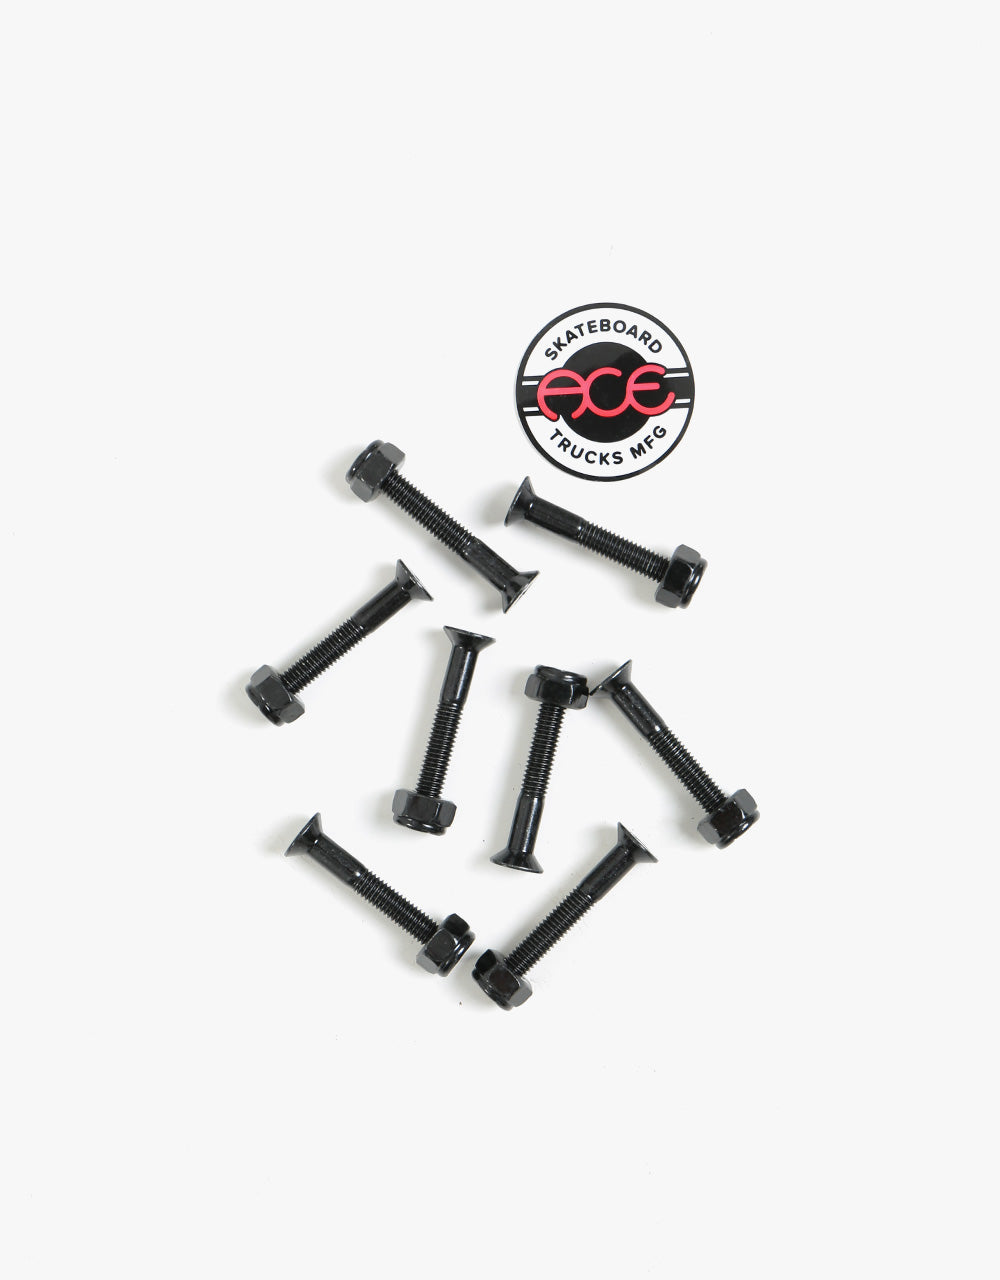 Ace 1 1/4" Phillips Bolts